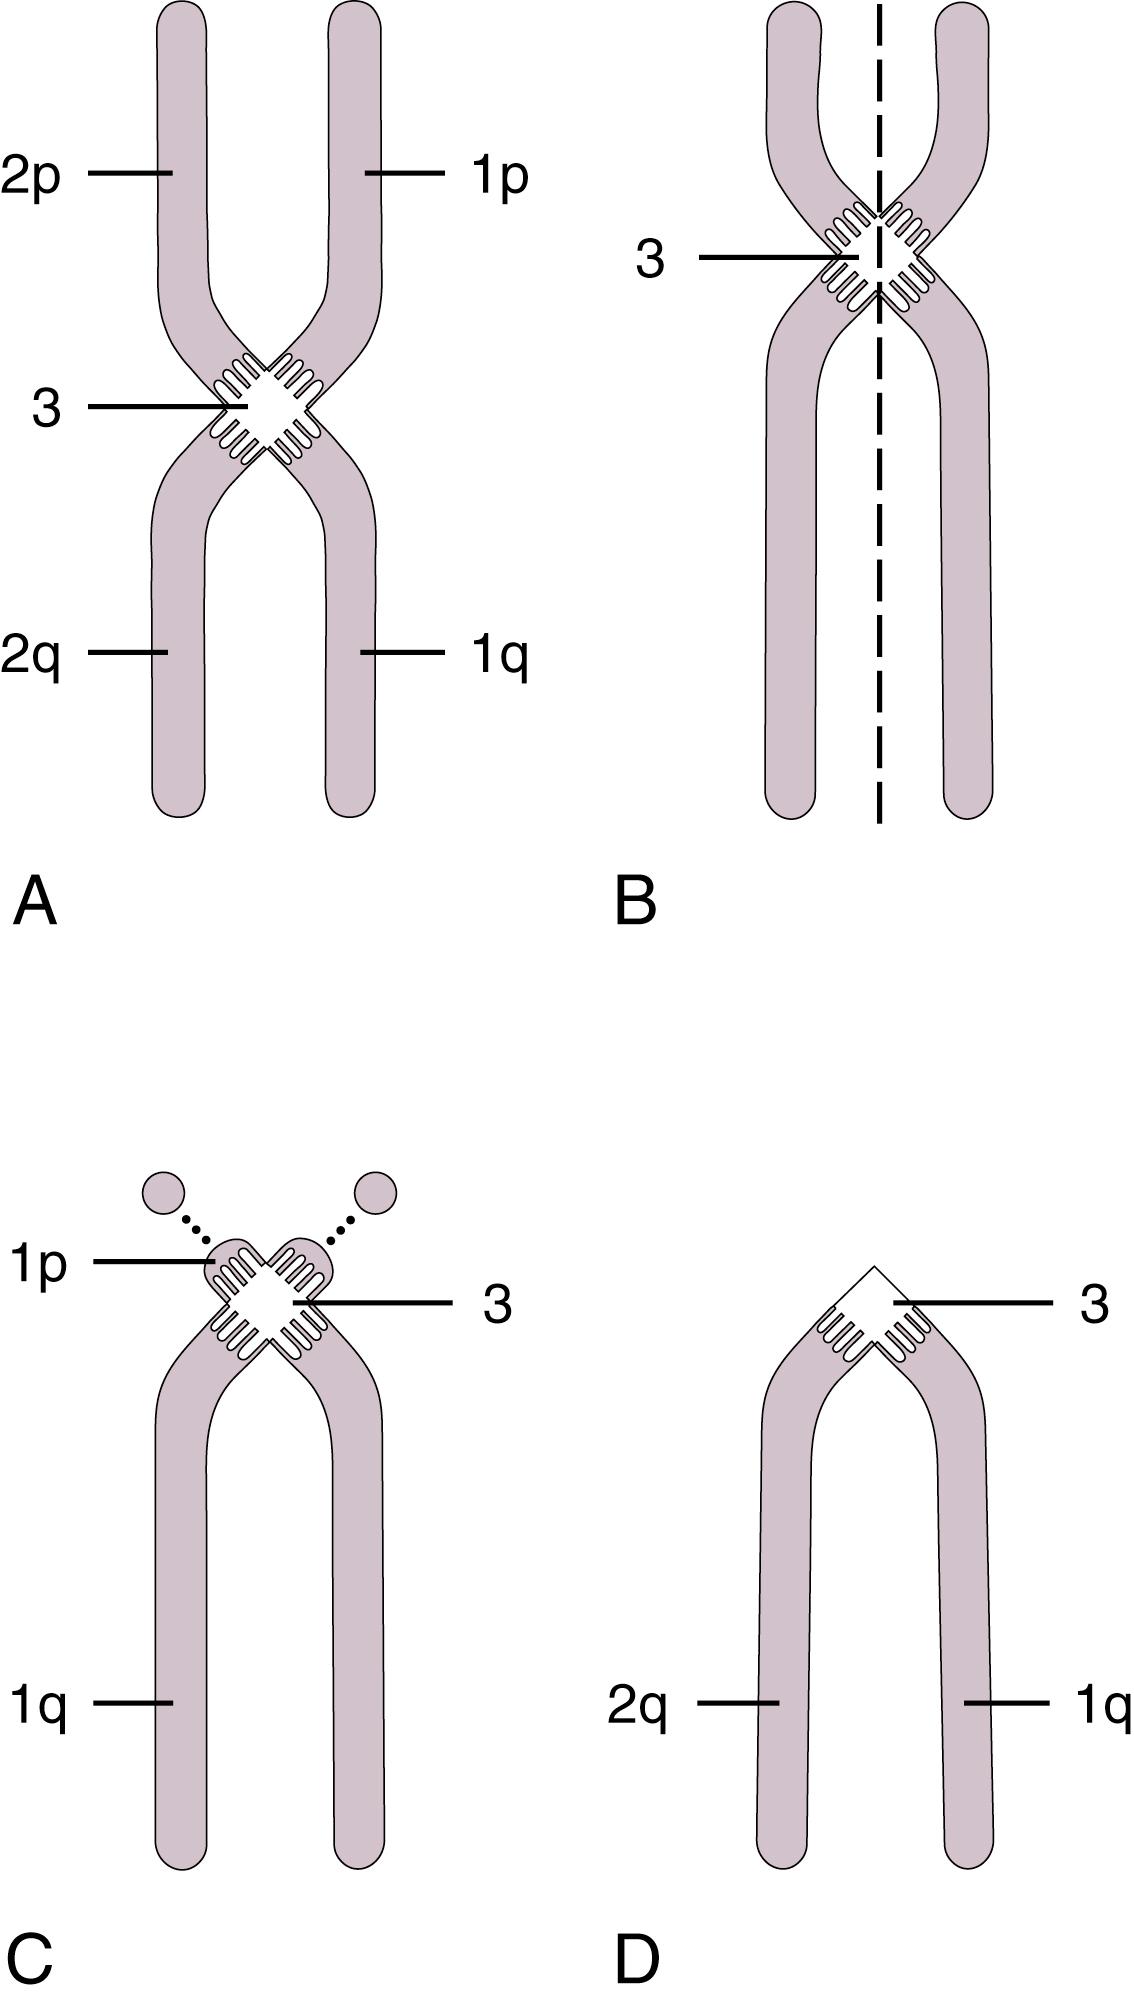 Fig. 1.5, Morphology of a chromosome during metaphase. (A) Metacentric chromosome with centromere (3) in the middle. (B) Submetacentric chromosome with centromere off-center. (C) Acrocentric chromosome with centromere near one end. (D) Telocentric chromosome (not found in humans) with centromere at one end. The deoxyribonucleic acid of the chromosome has replicated to form two chromatids: 1p and 1q represent one complete chromatid, 2p and 2q the other complete chromatid ( p refers to the short arm and q refers to the long arm). The chromosome will then divide longitudinally, as shown in (B).